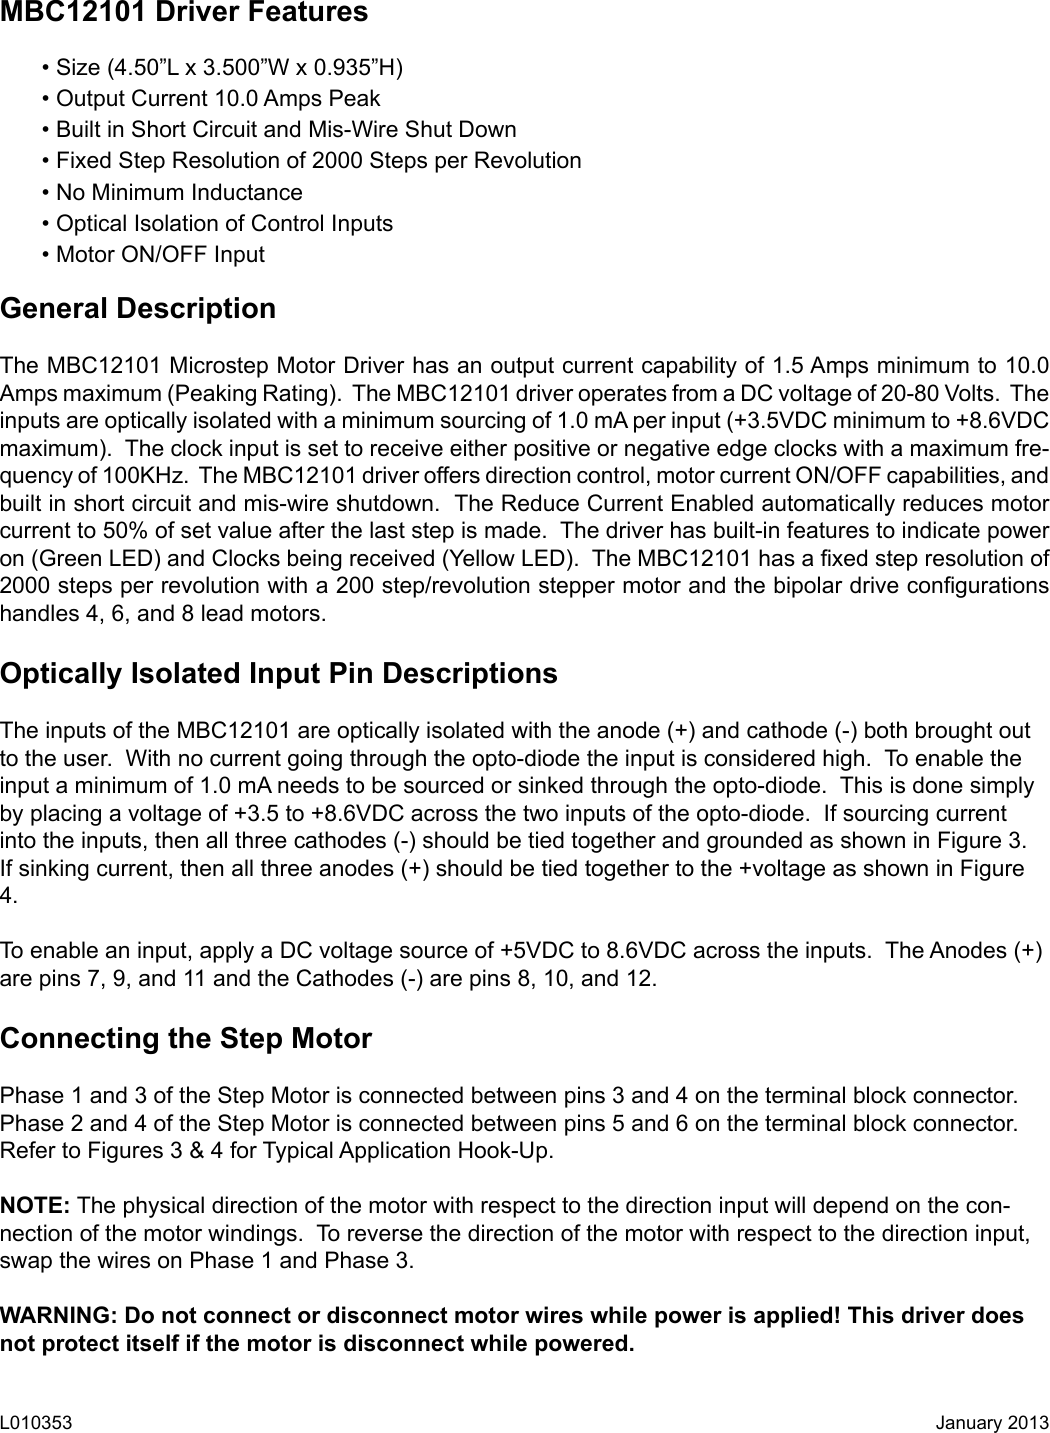 Page 2 of 9 - L010353 - MBC12101 Series Users Guide